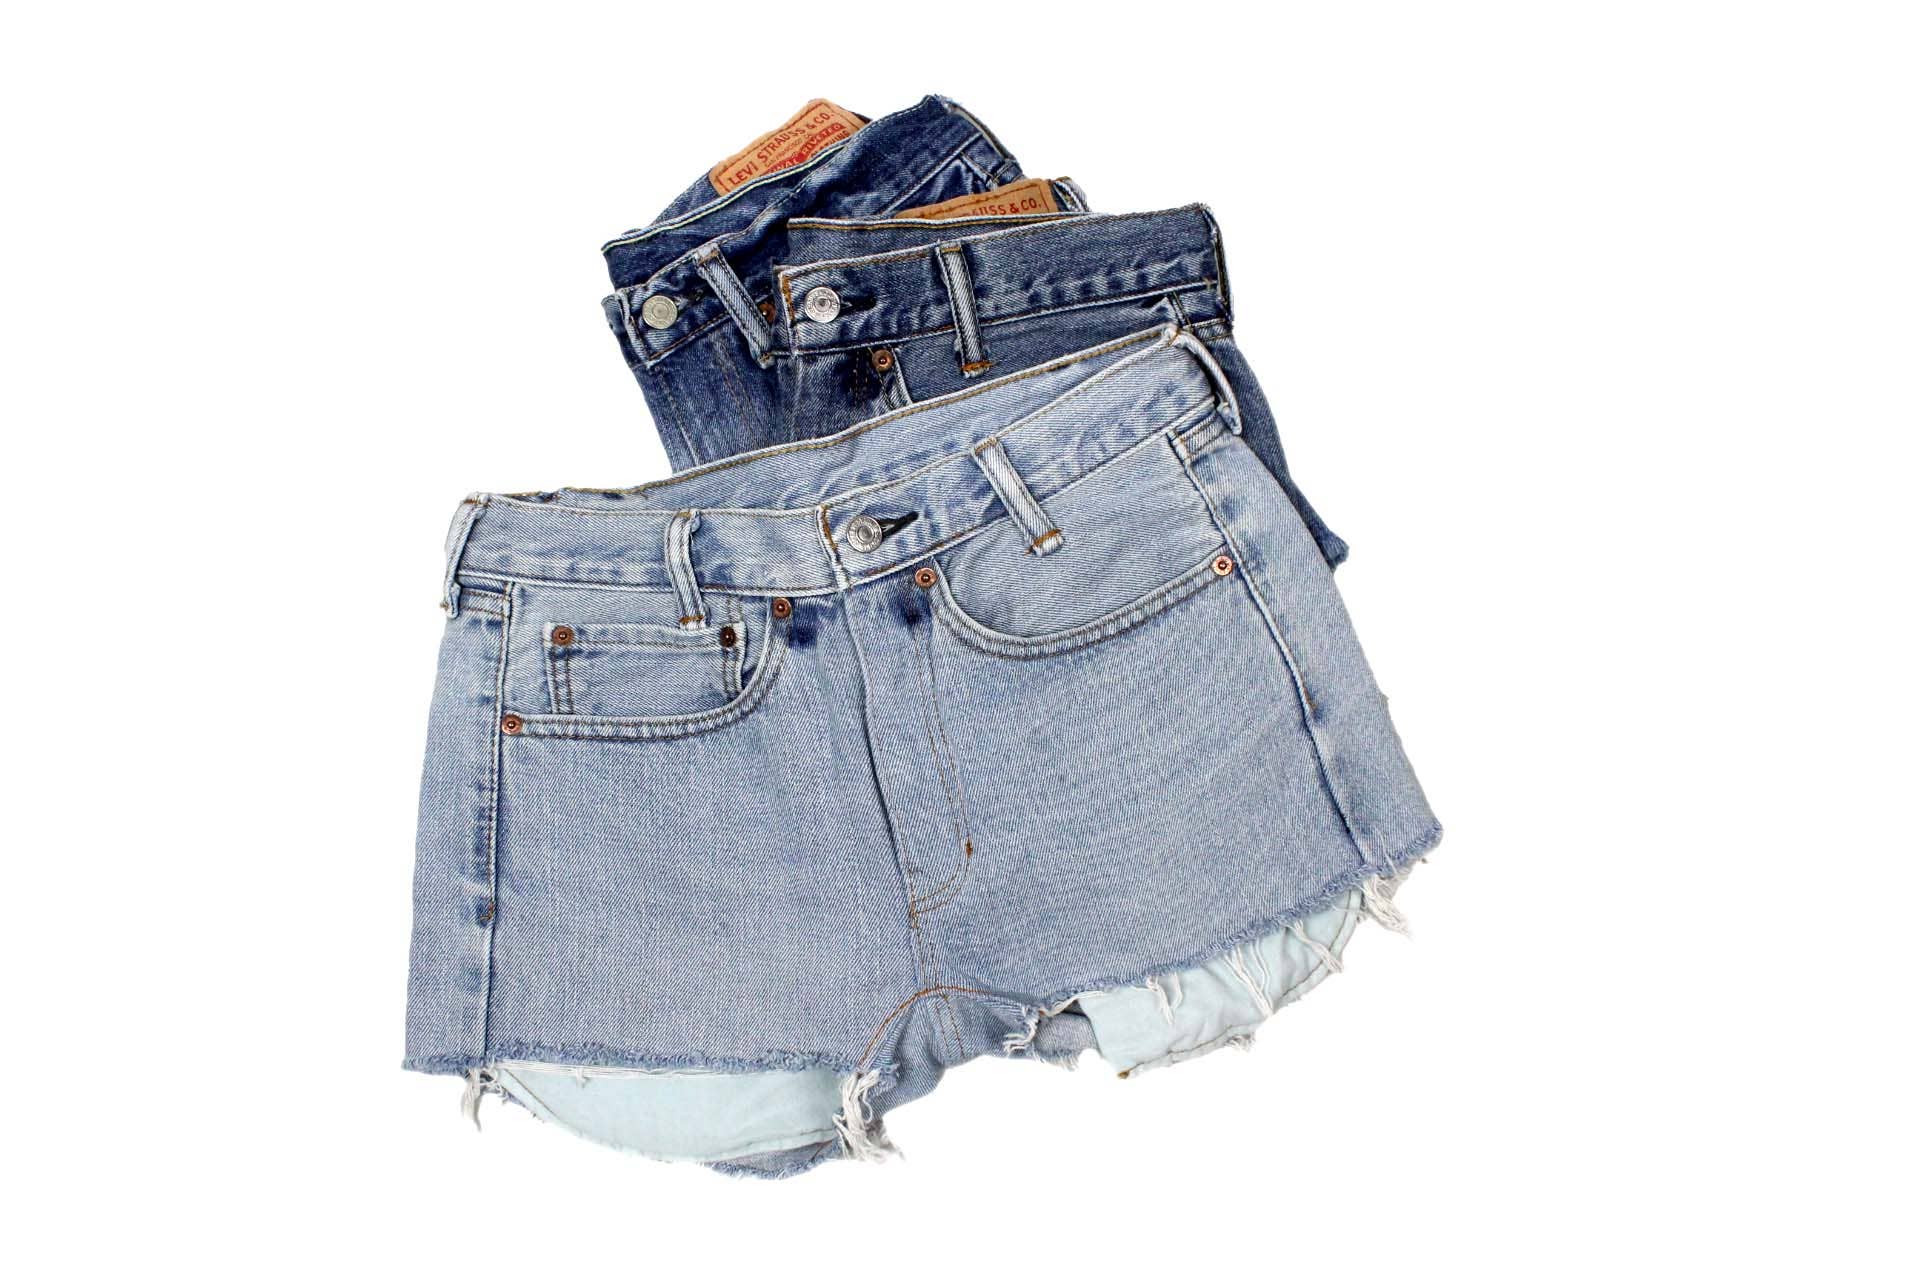 Sun's Out! - Low-Rise Upcycled Denim Shorty Shorts